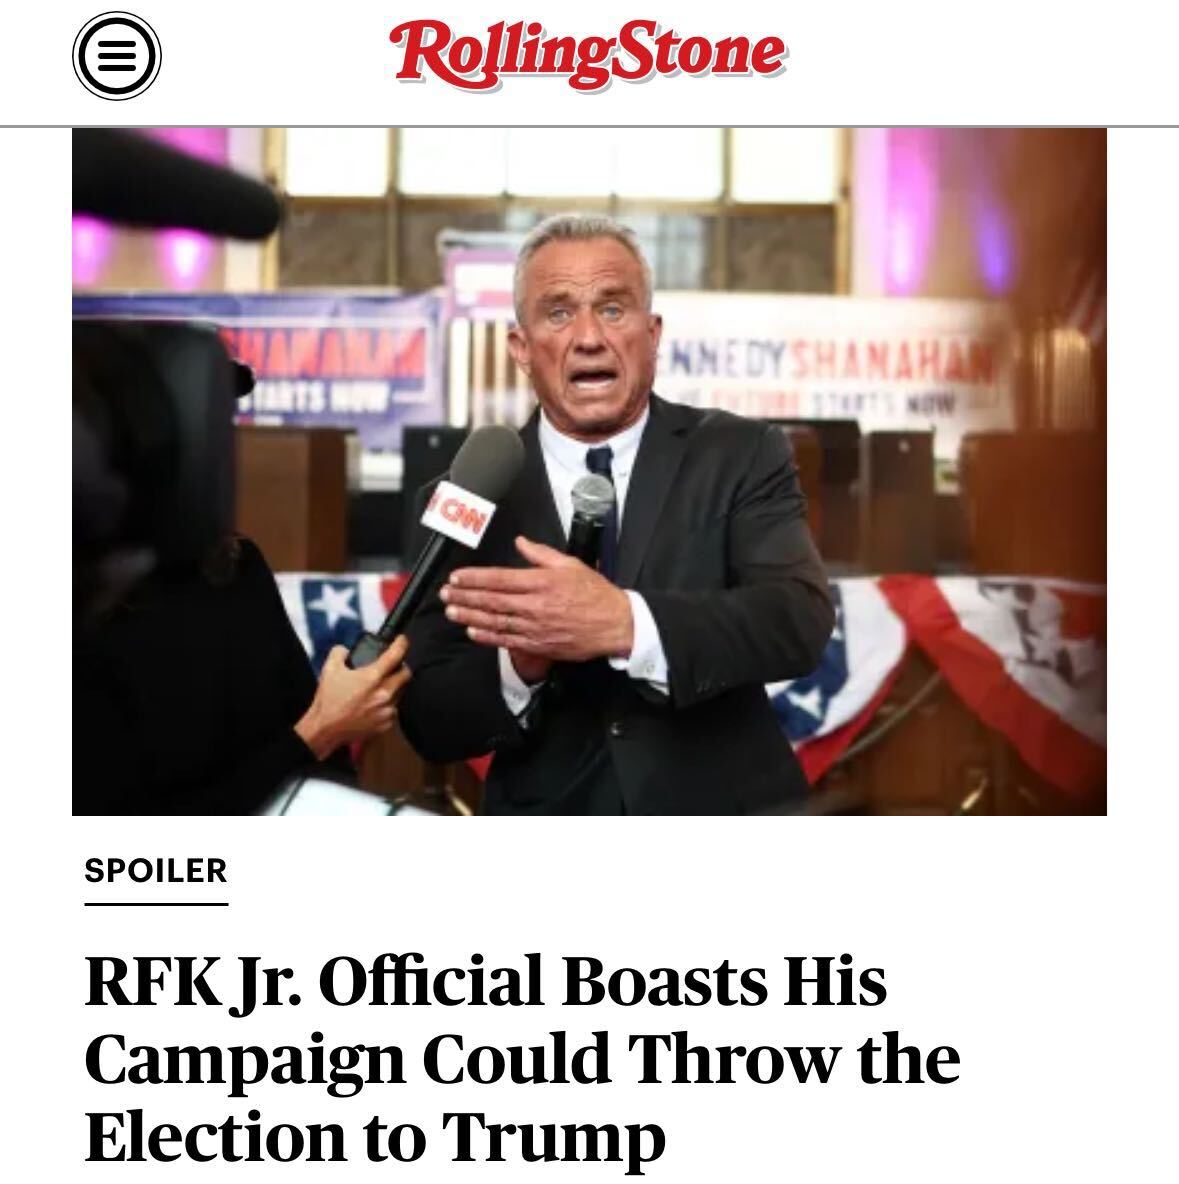 A campaign official representing Robert F. Kennedy Jr. told voters that her “number one priority” is ensuring Joe Biden loses in November. Watch: rollingstone.com/politics/polit…